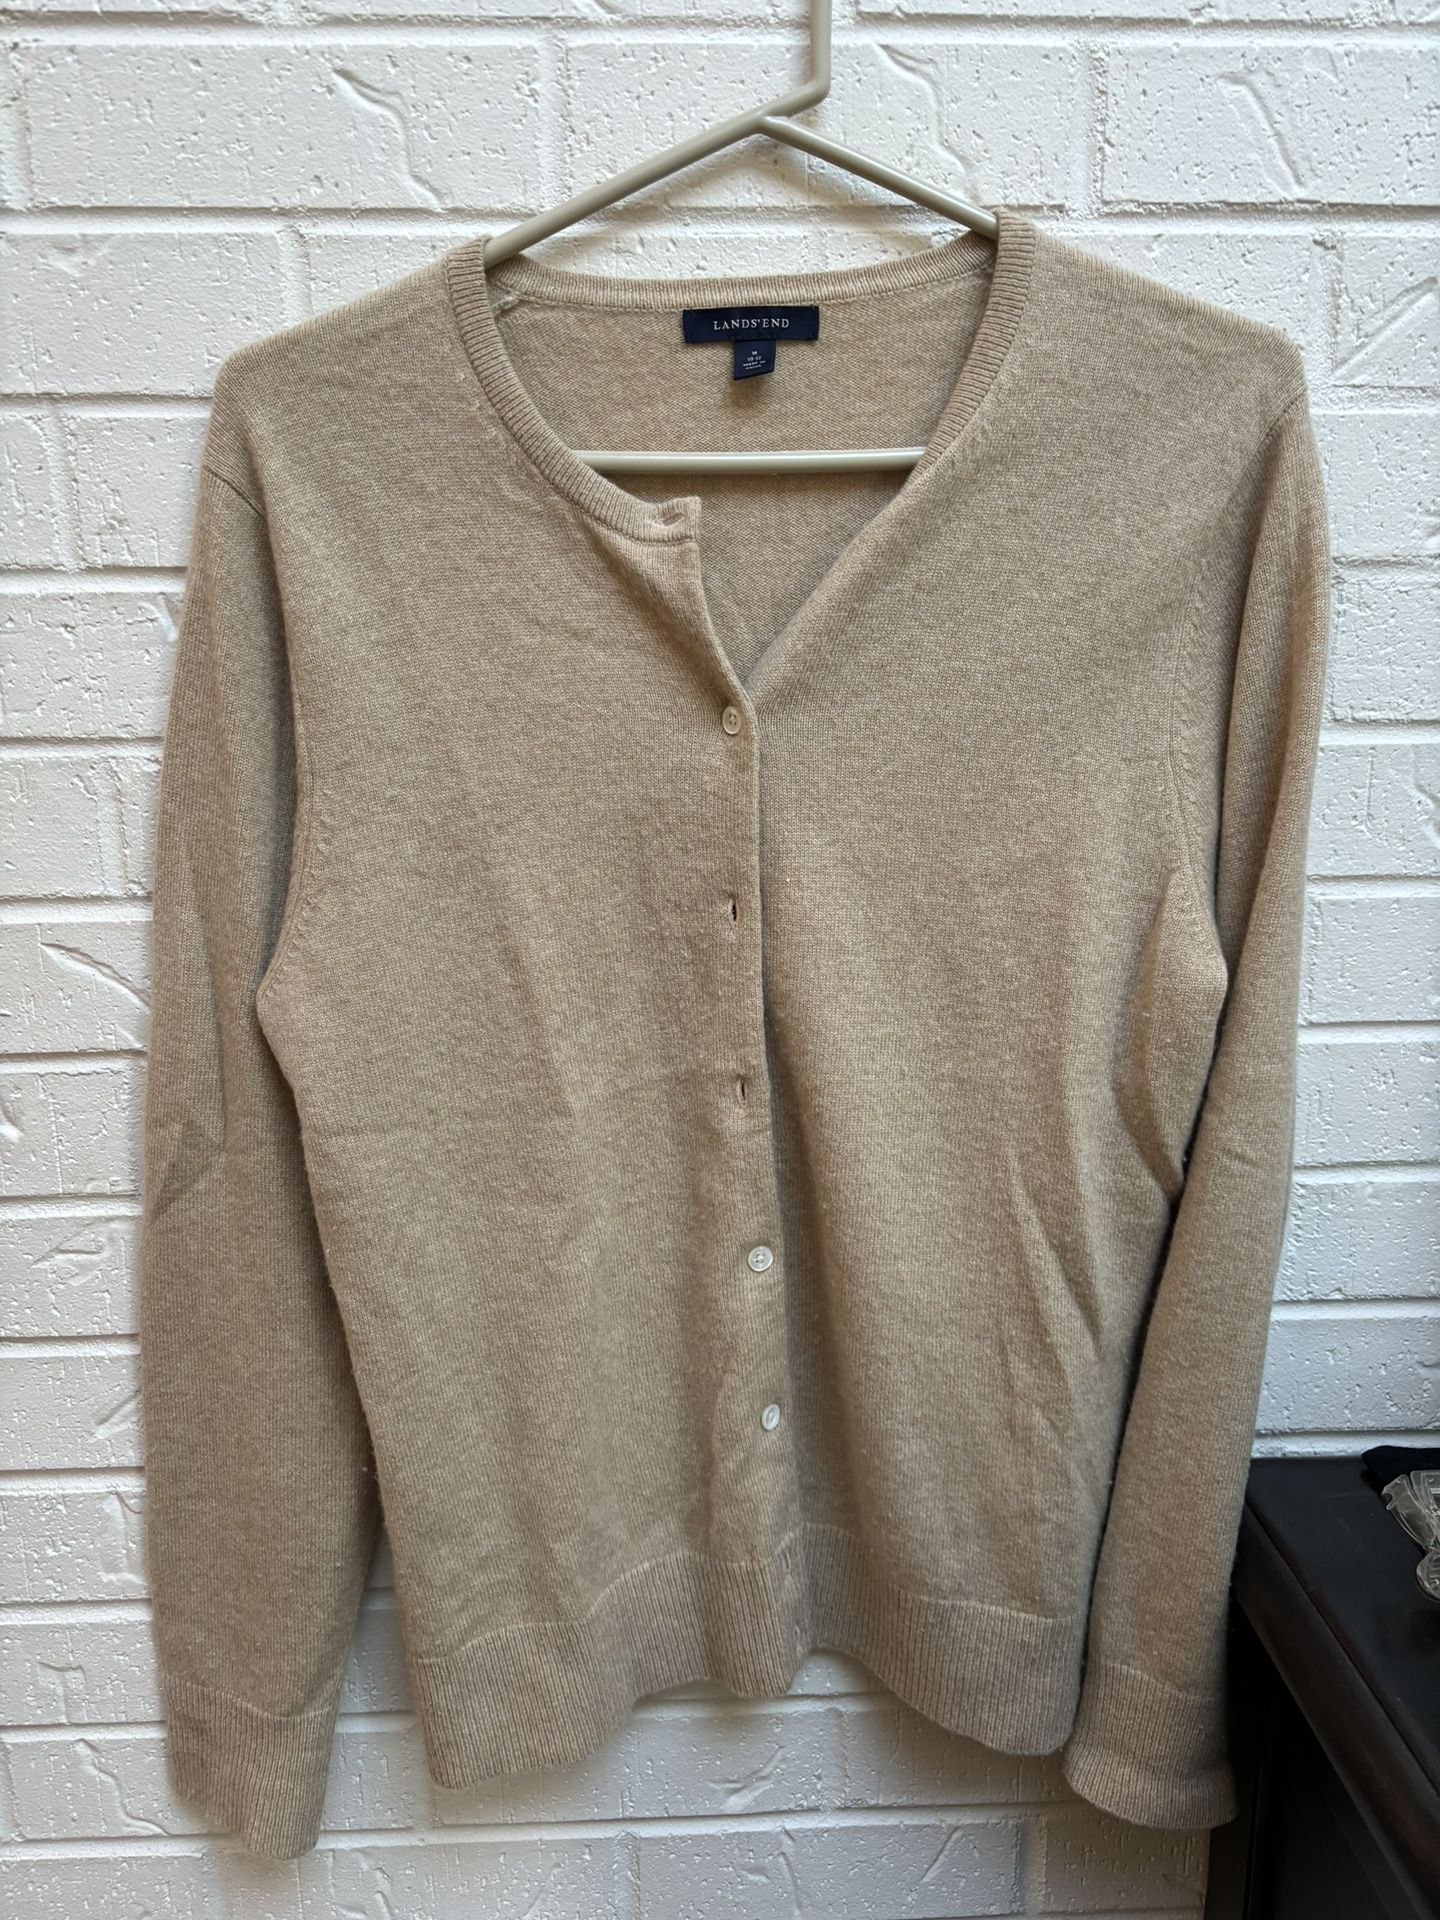 Land’s End Preowned Women’s Tan Cashmere Cardigan Size M